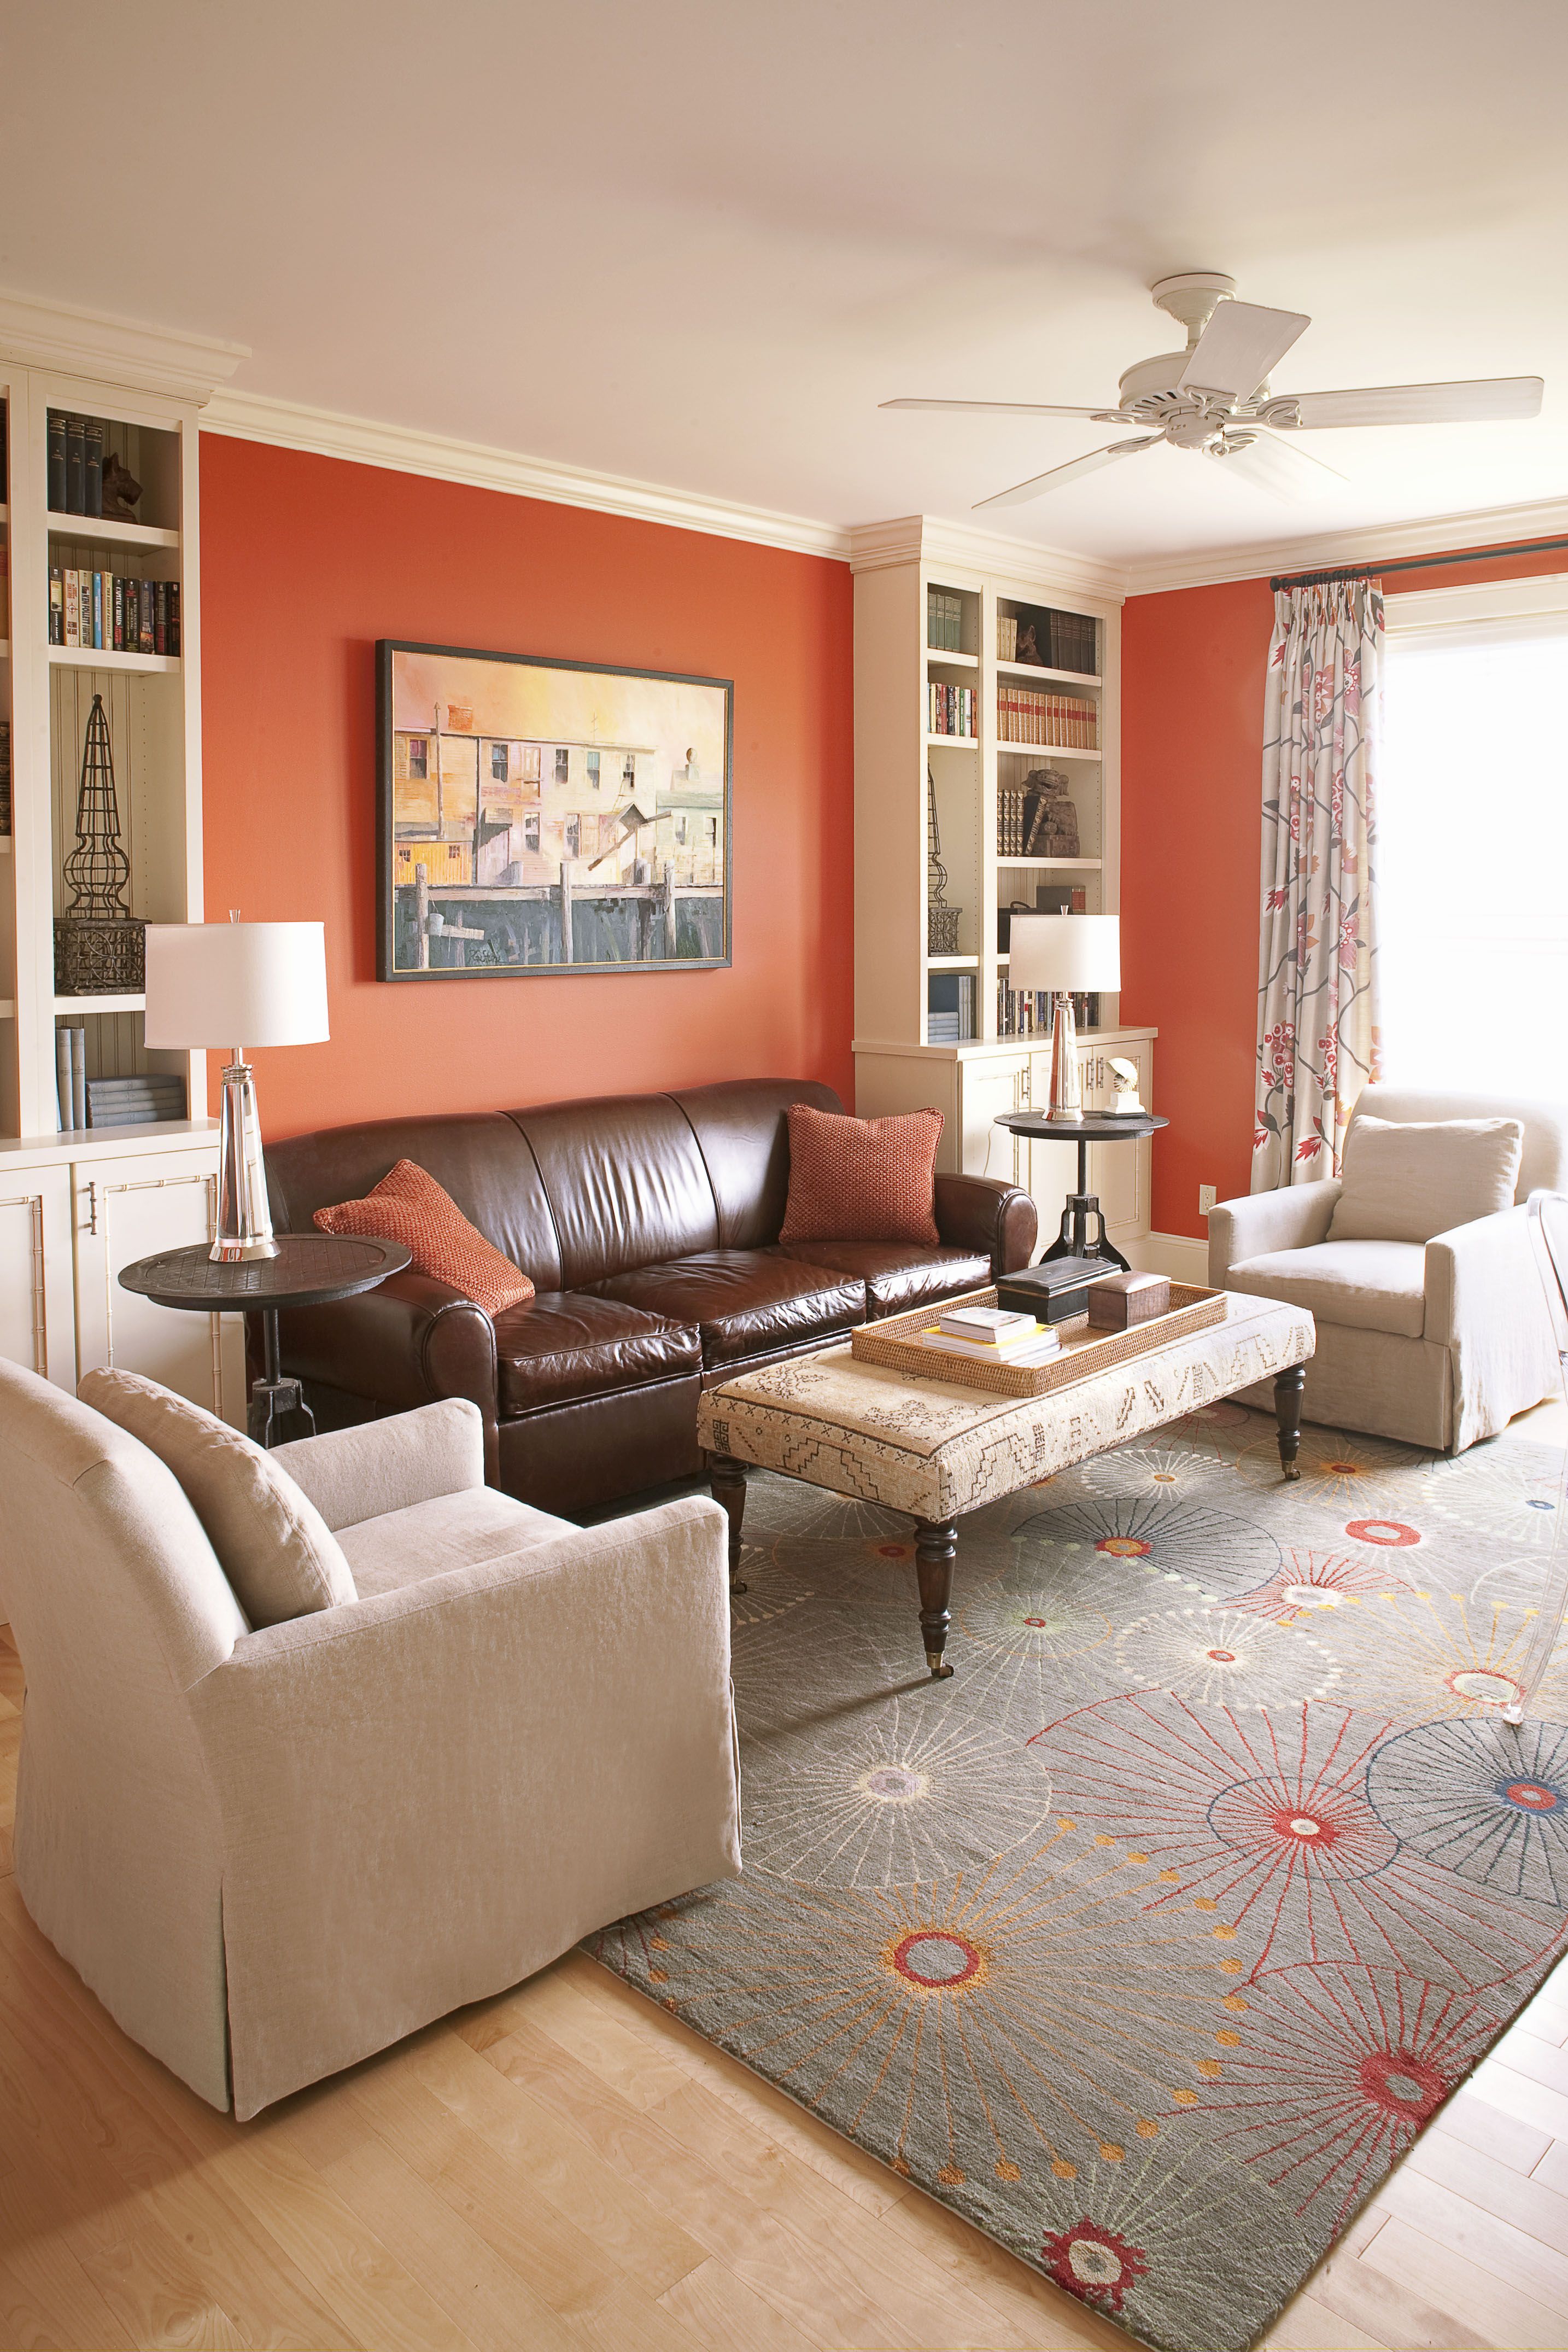 Paint Colors For Living Room Images | www.resnooze.com